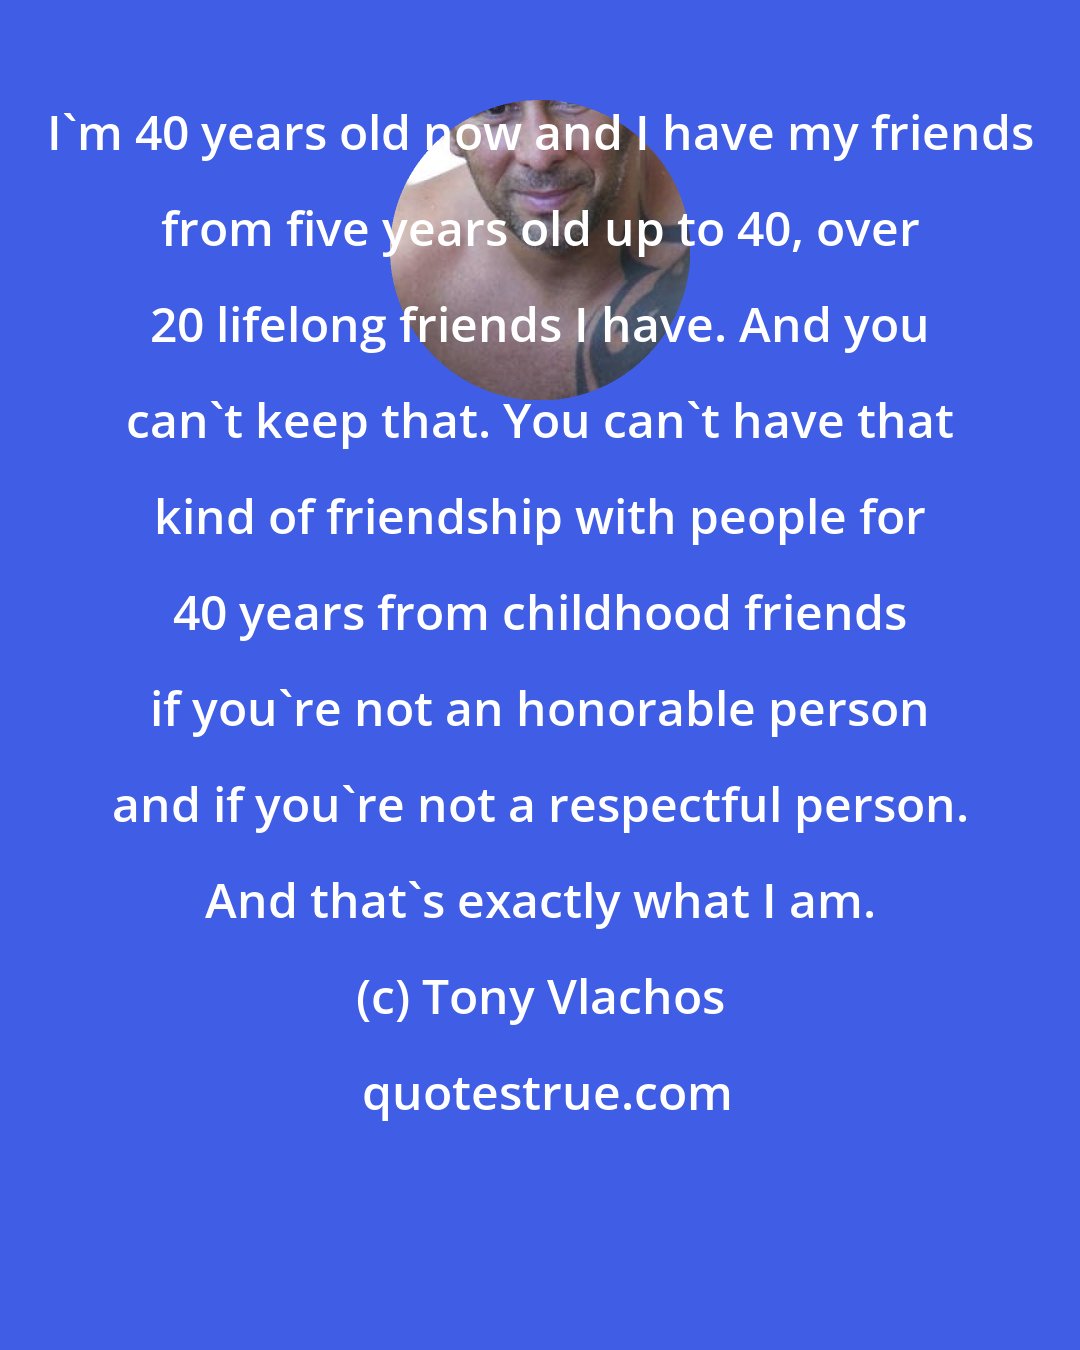 Tony Vlachos: I'm 40 years old now and I have my friends from five years old up to 40, over 20 lifelong friends I have. And you can't keep that. You can't have that kind of friendship with people for 40 years from childhood friends if you're not an honorable person and if you're not a respectful person. And that's exactly what I am.